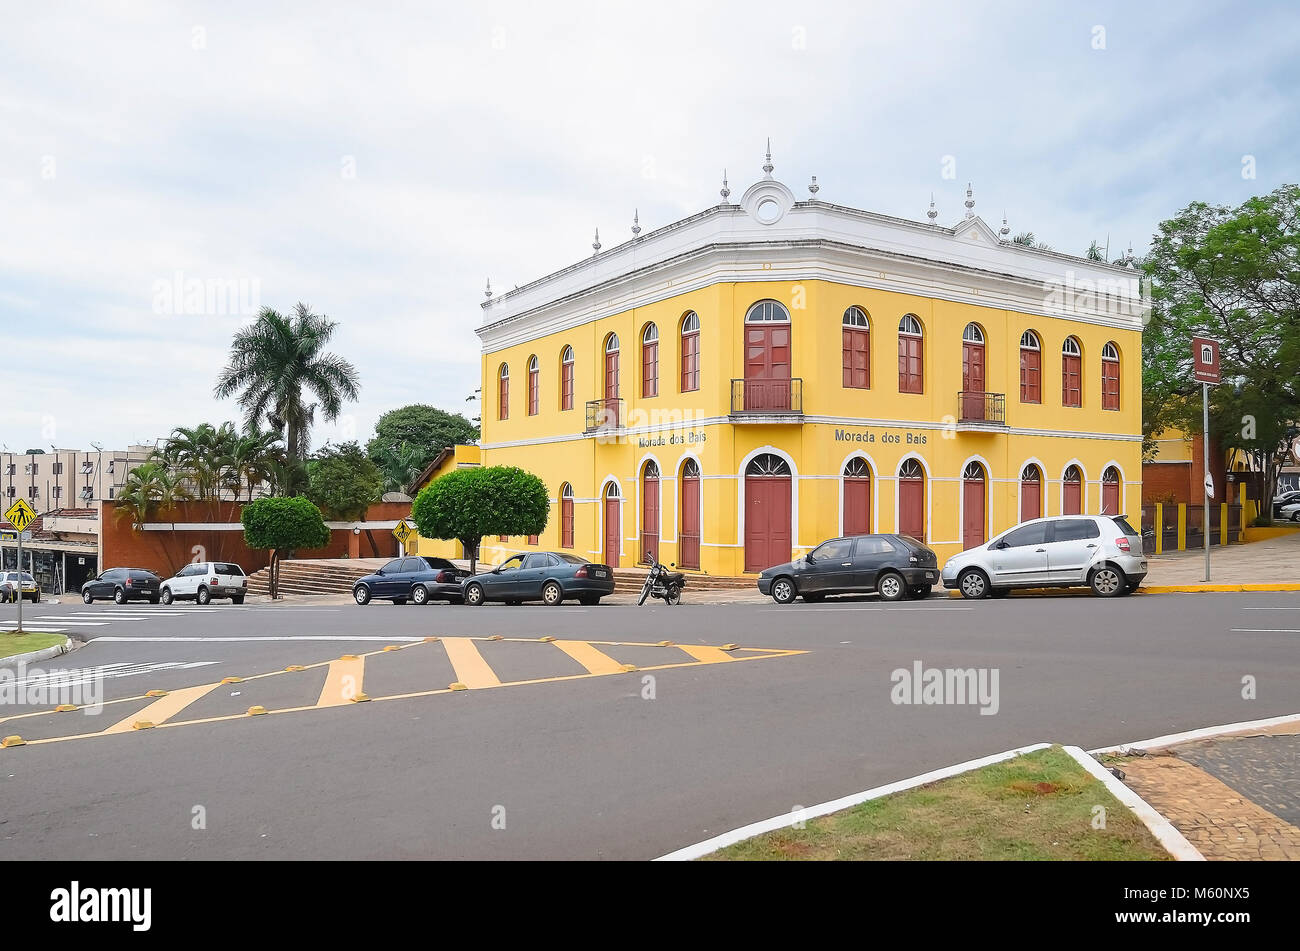 Campo Grande, Brazil - February 24, 2018: Historic building from Campo Grande MS called Morada dos Bais. Today this place is a touristic place for inf Stock Photo